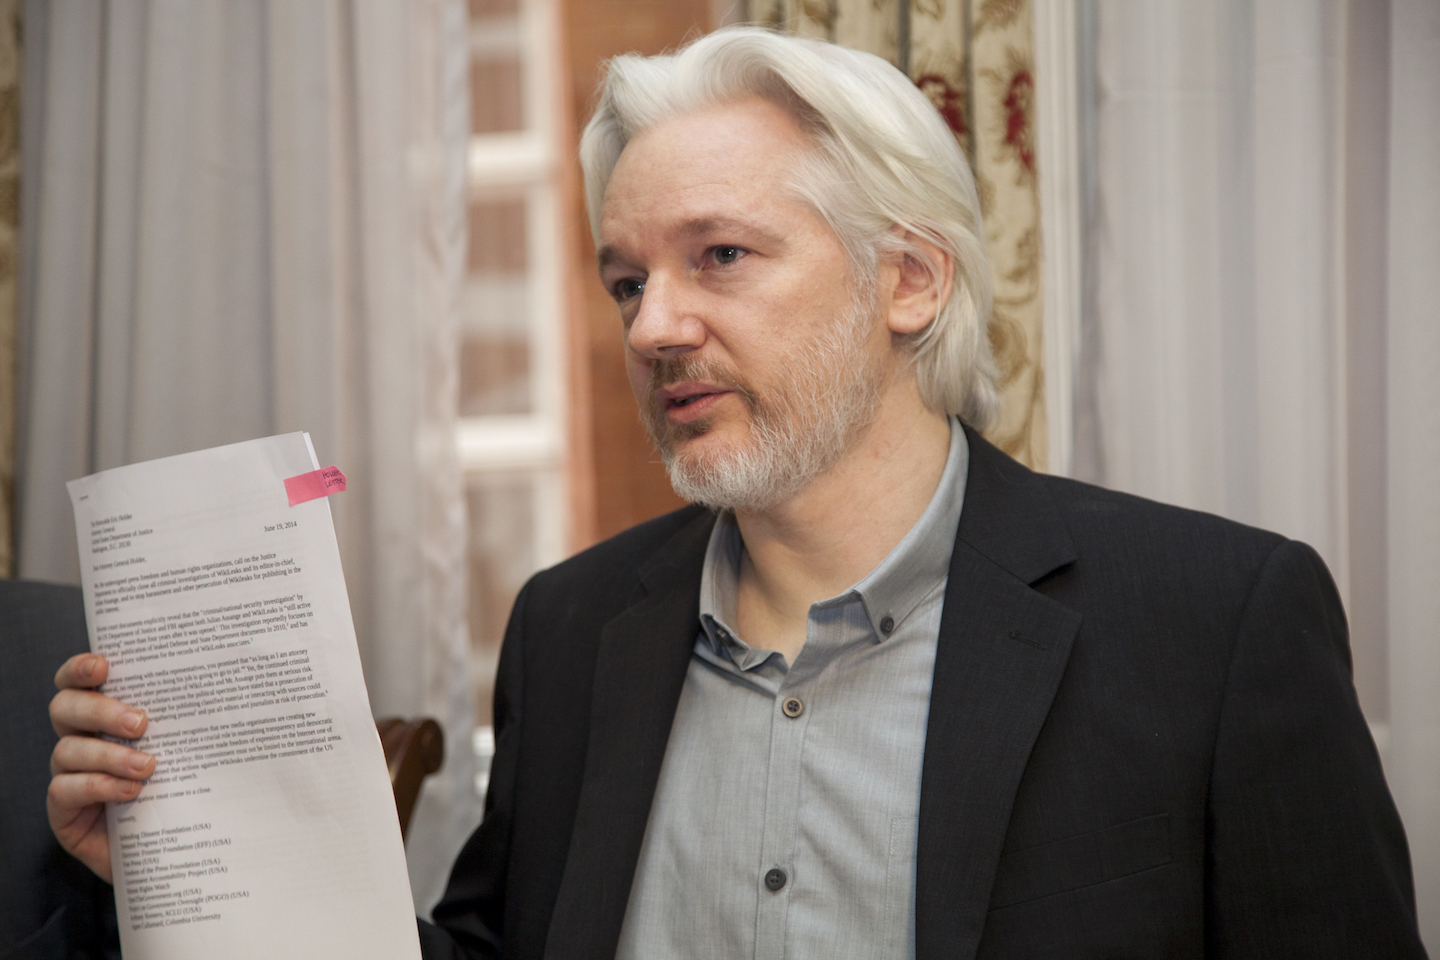 Ecuador govt claims Assange was ‘interfering’ with the US election so they silenced him